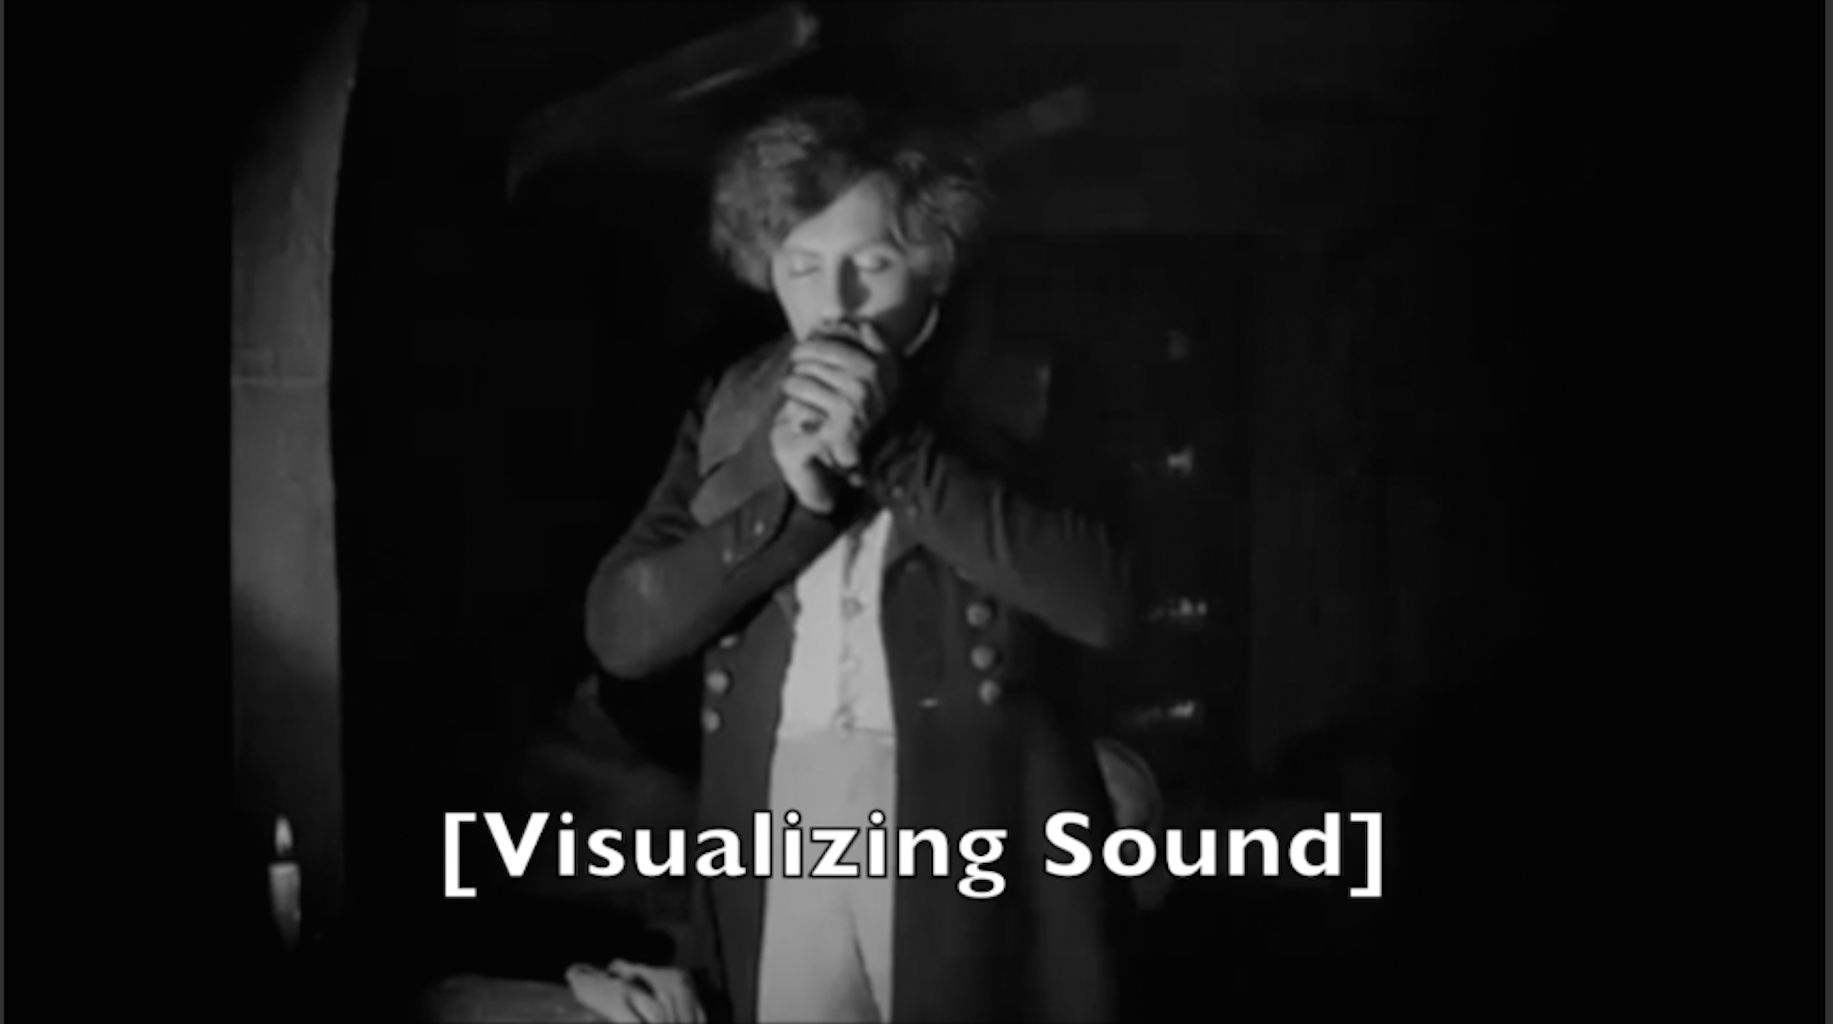 Image of a man kissing something in his hands, with a the title "Visualizing Sound" in brackets.